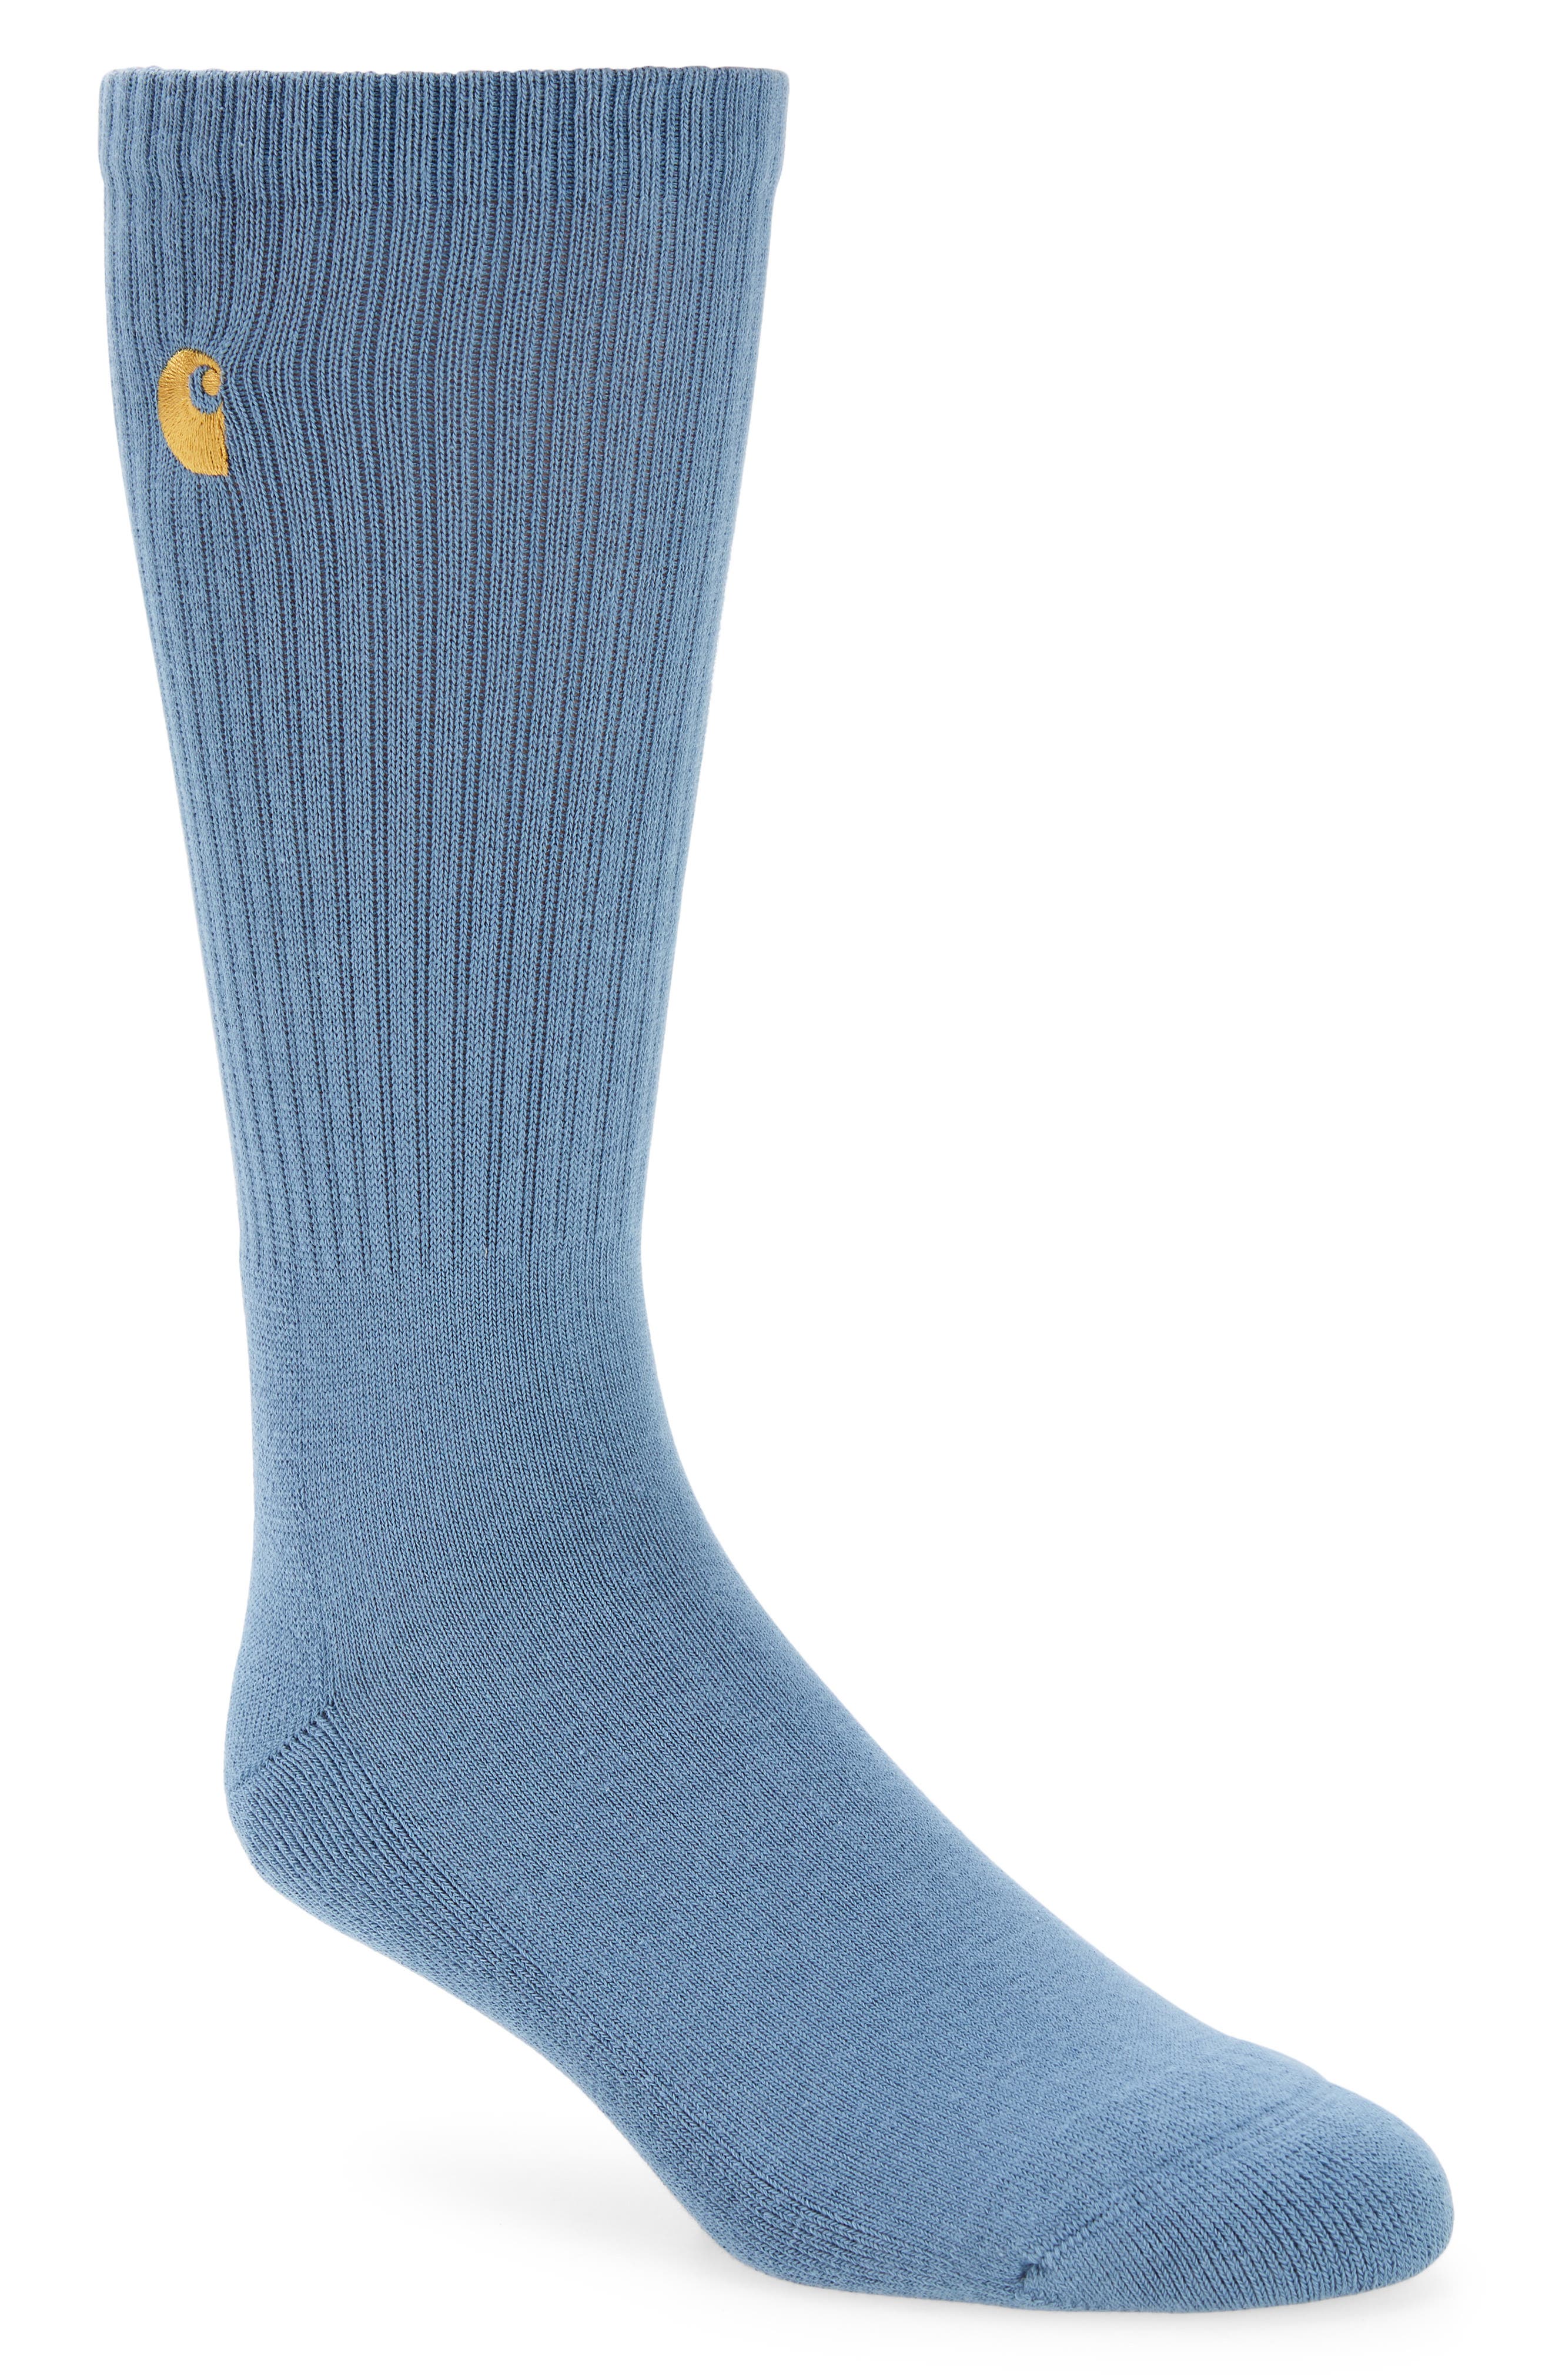 CARHARTT WORK IN PROGRESS Chase Crew Socks in Icy Water /Gold